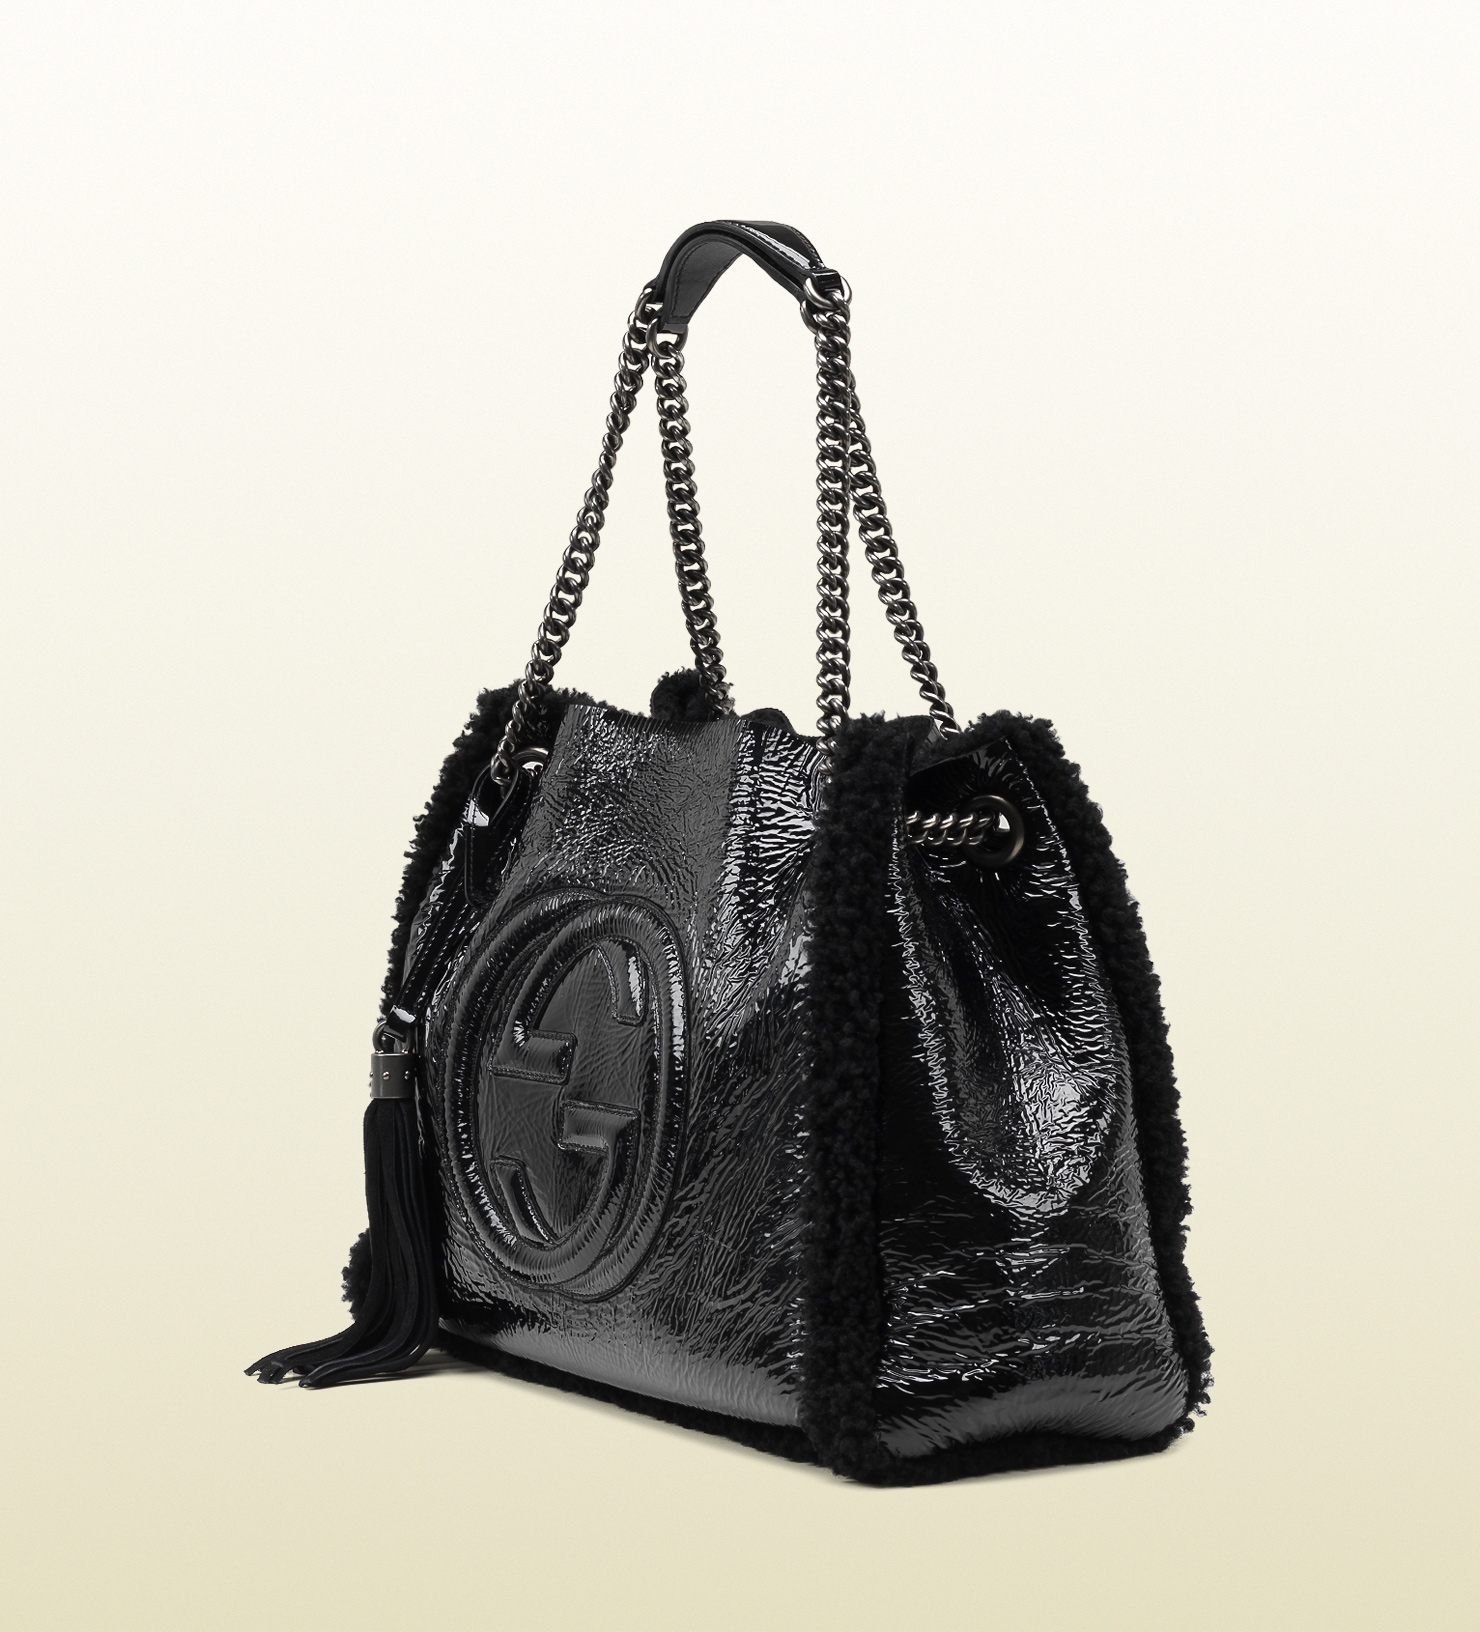 Gucci Soho Crushed Patent Leather Shoulder Bag in Black | Lyst